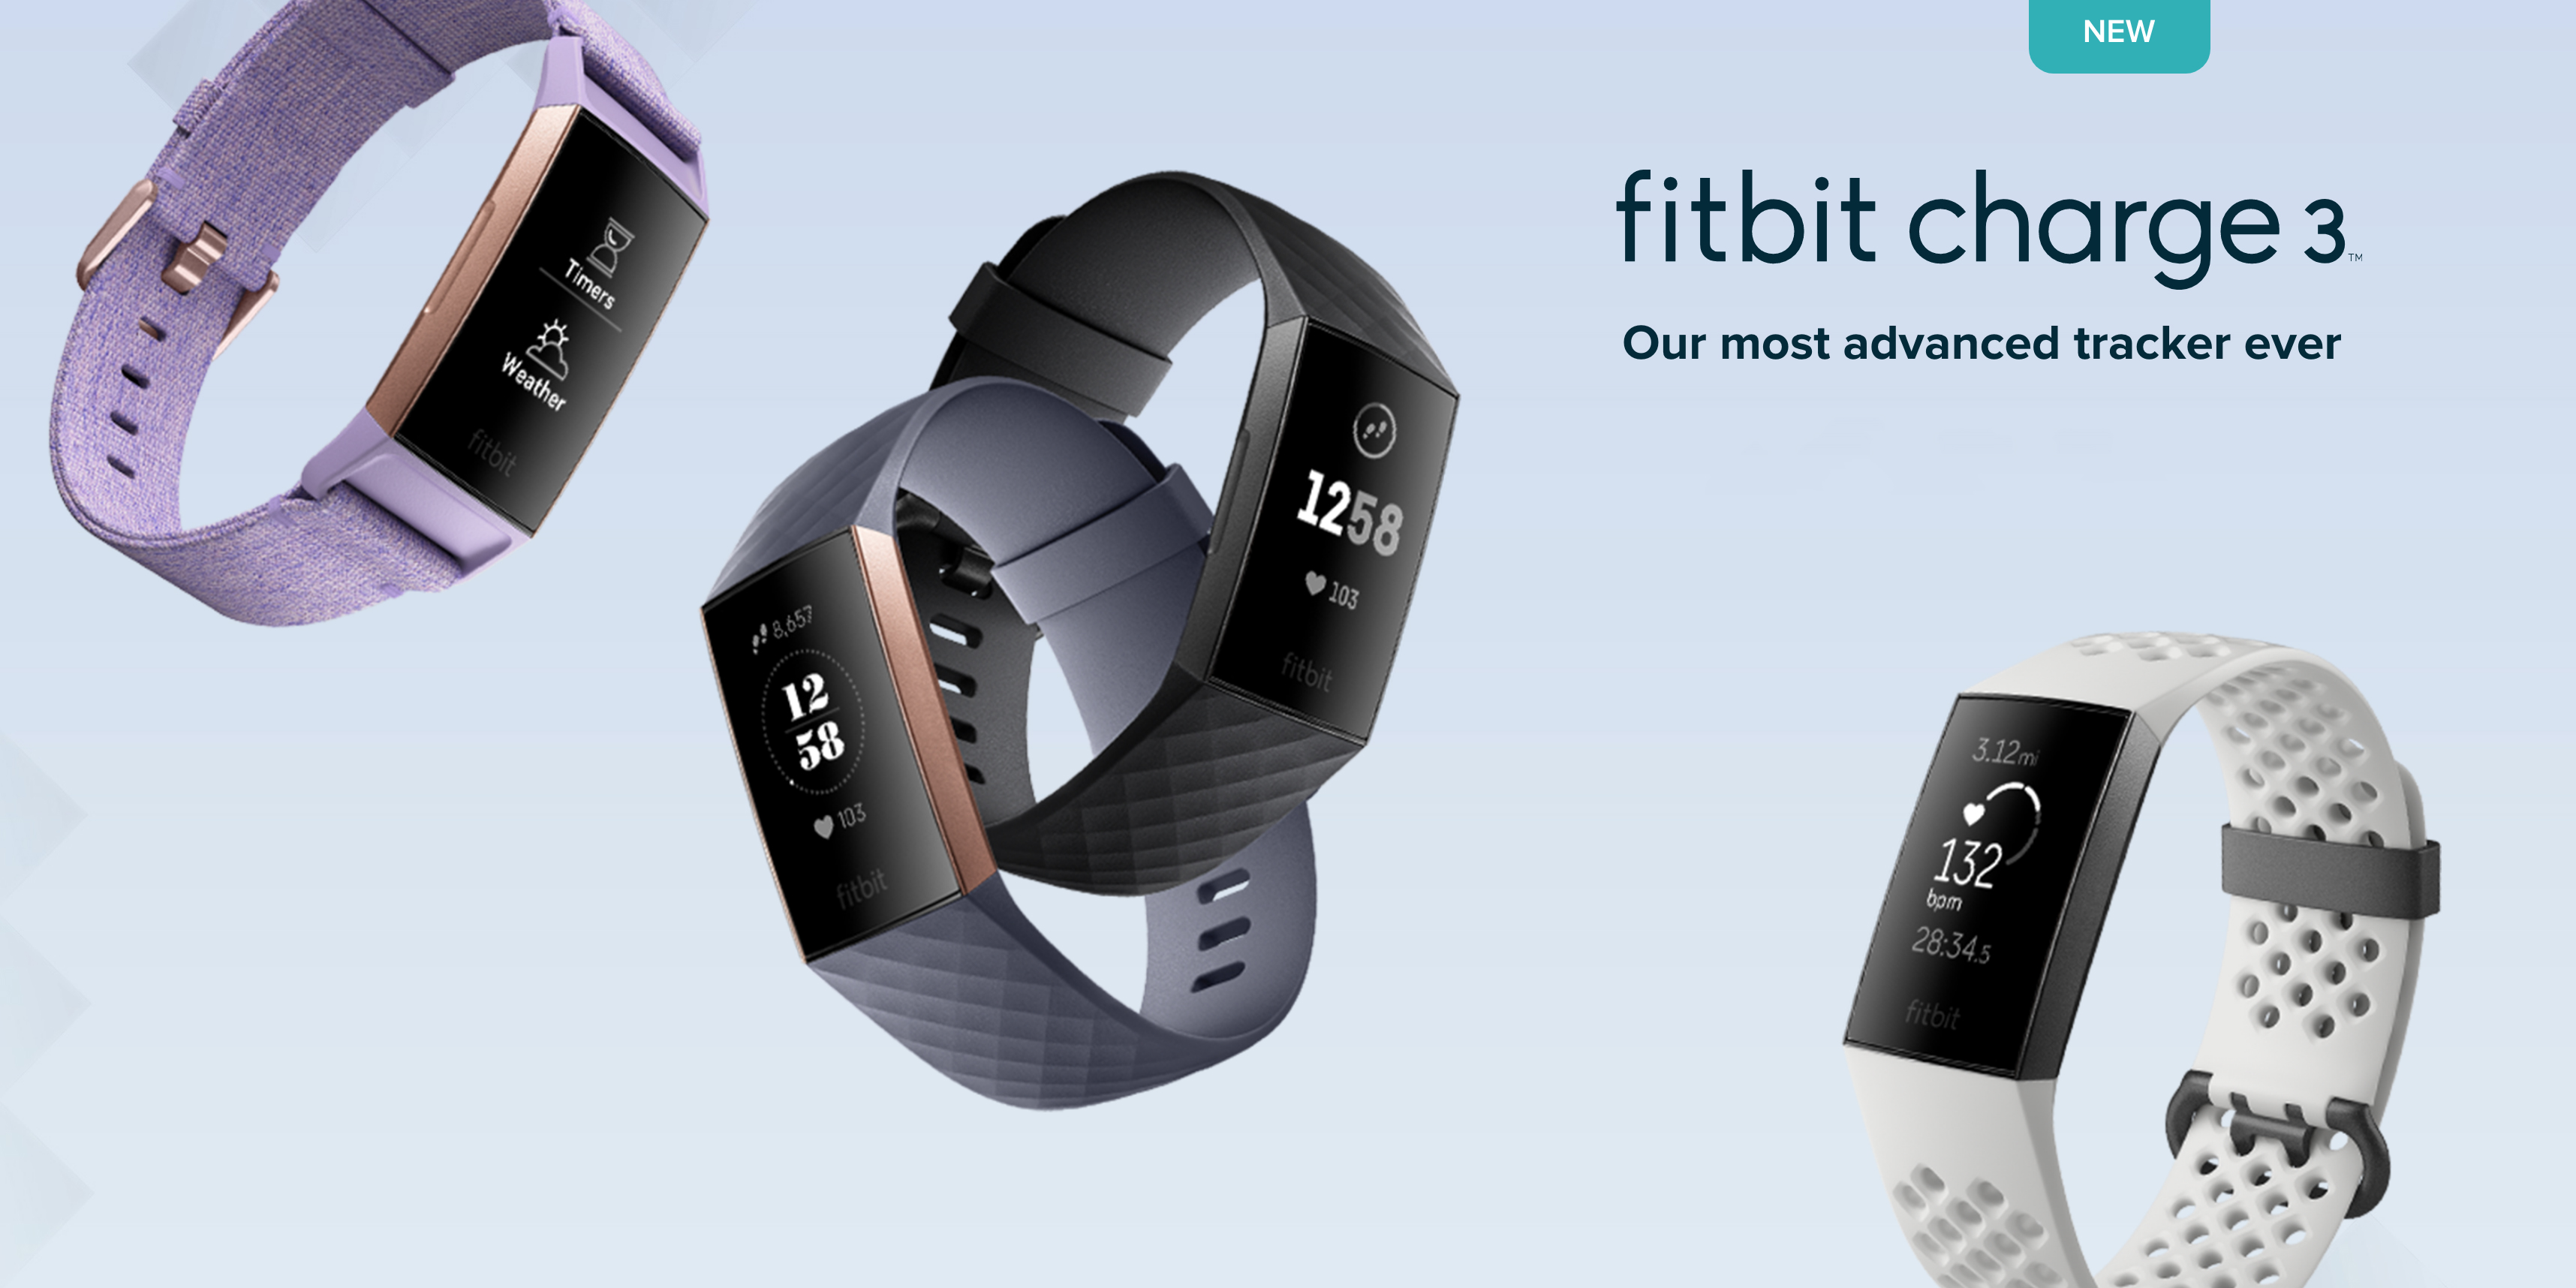 fitbit charge 3 bands kohl's